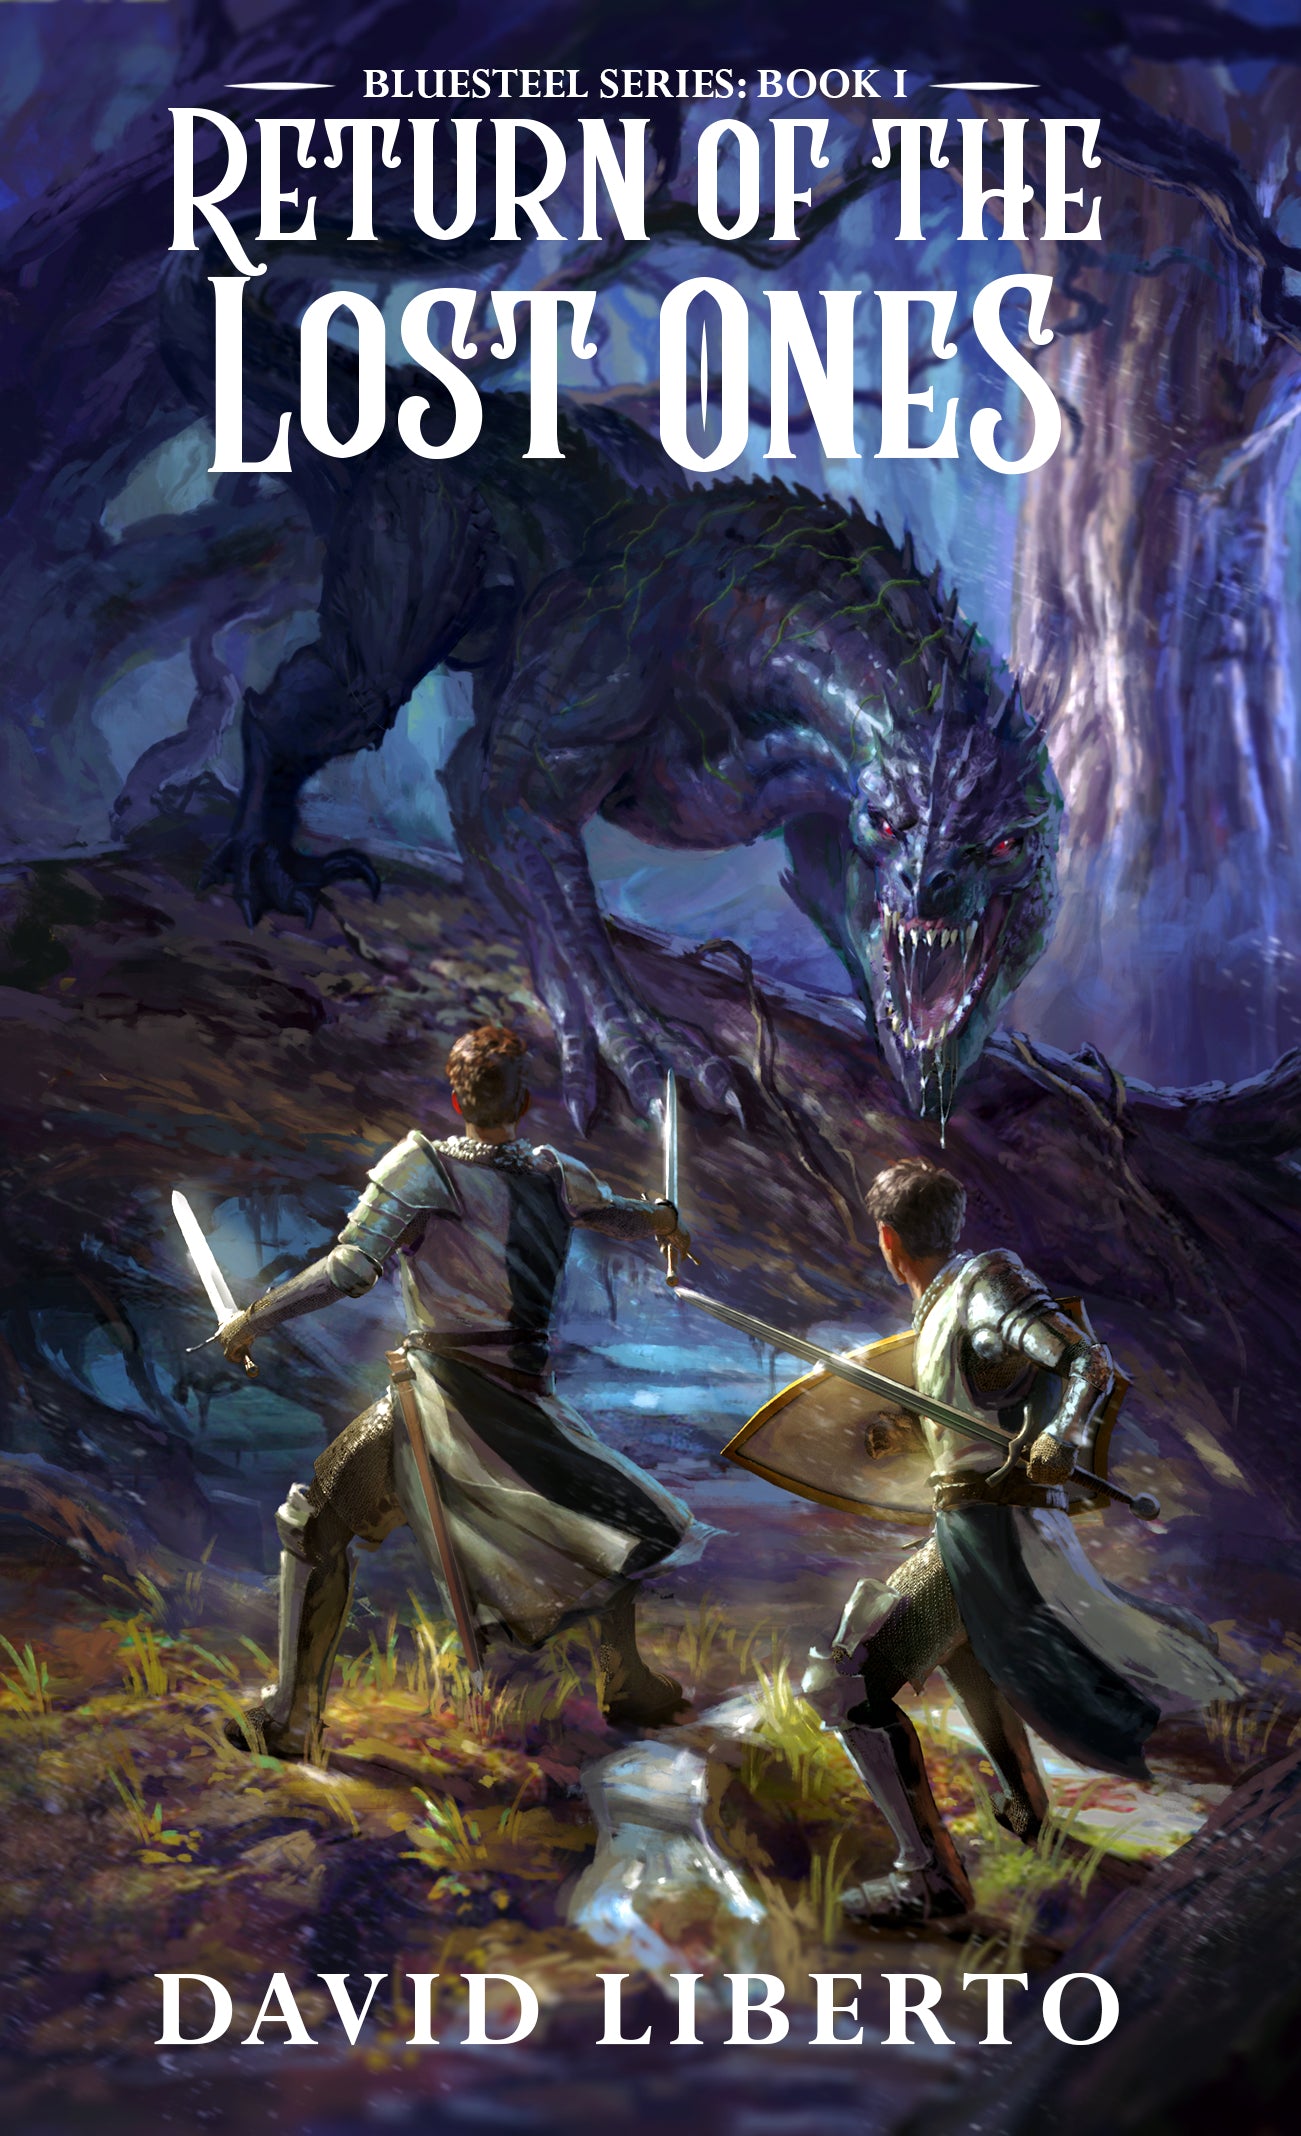 Return of the Lost Ones HardCover